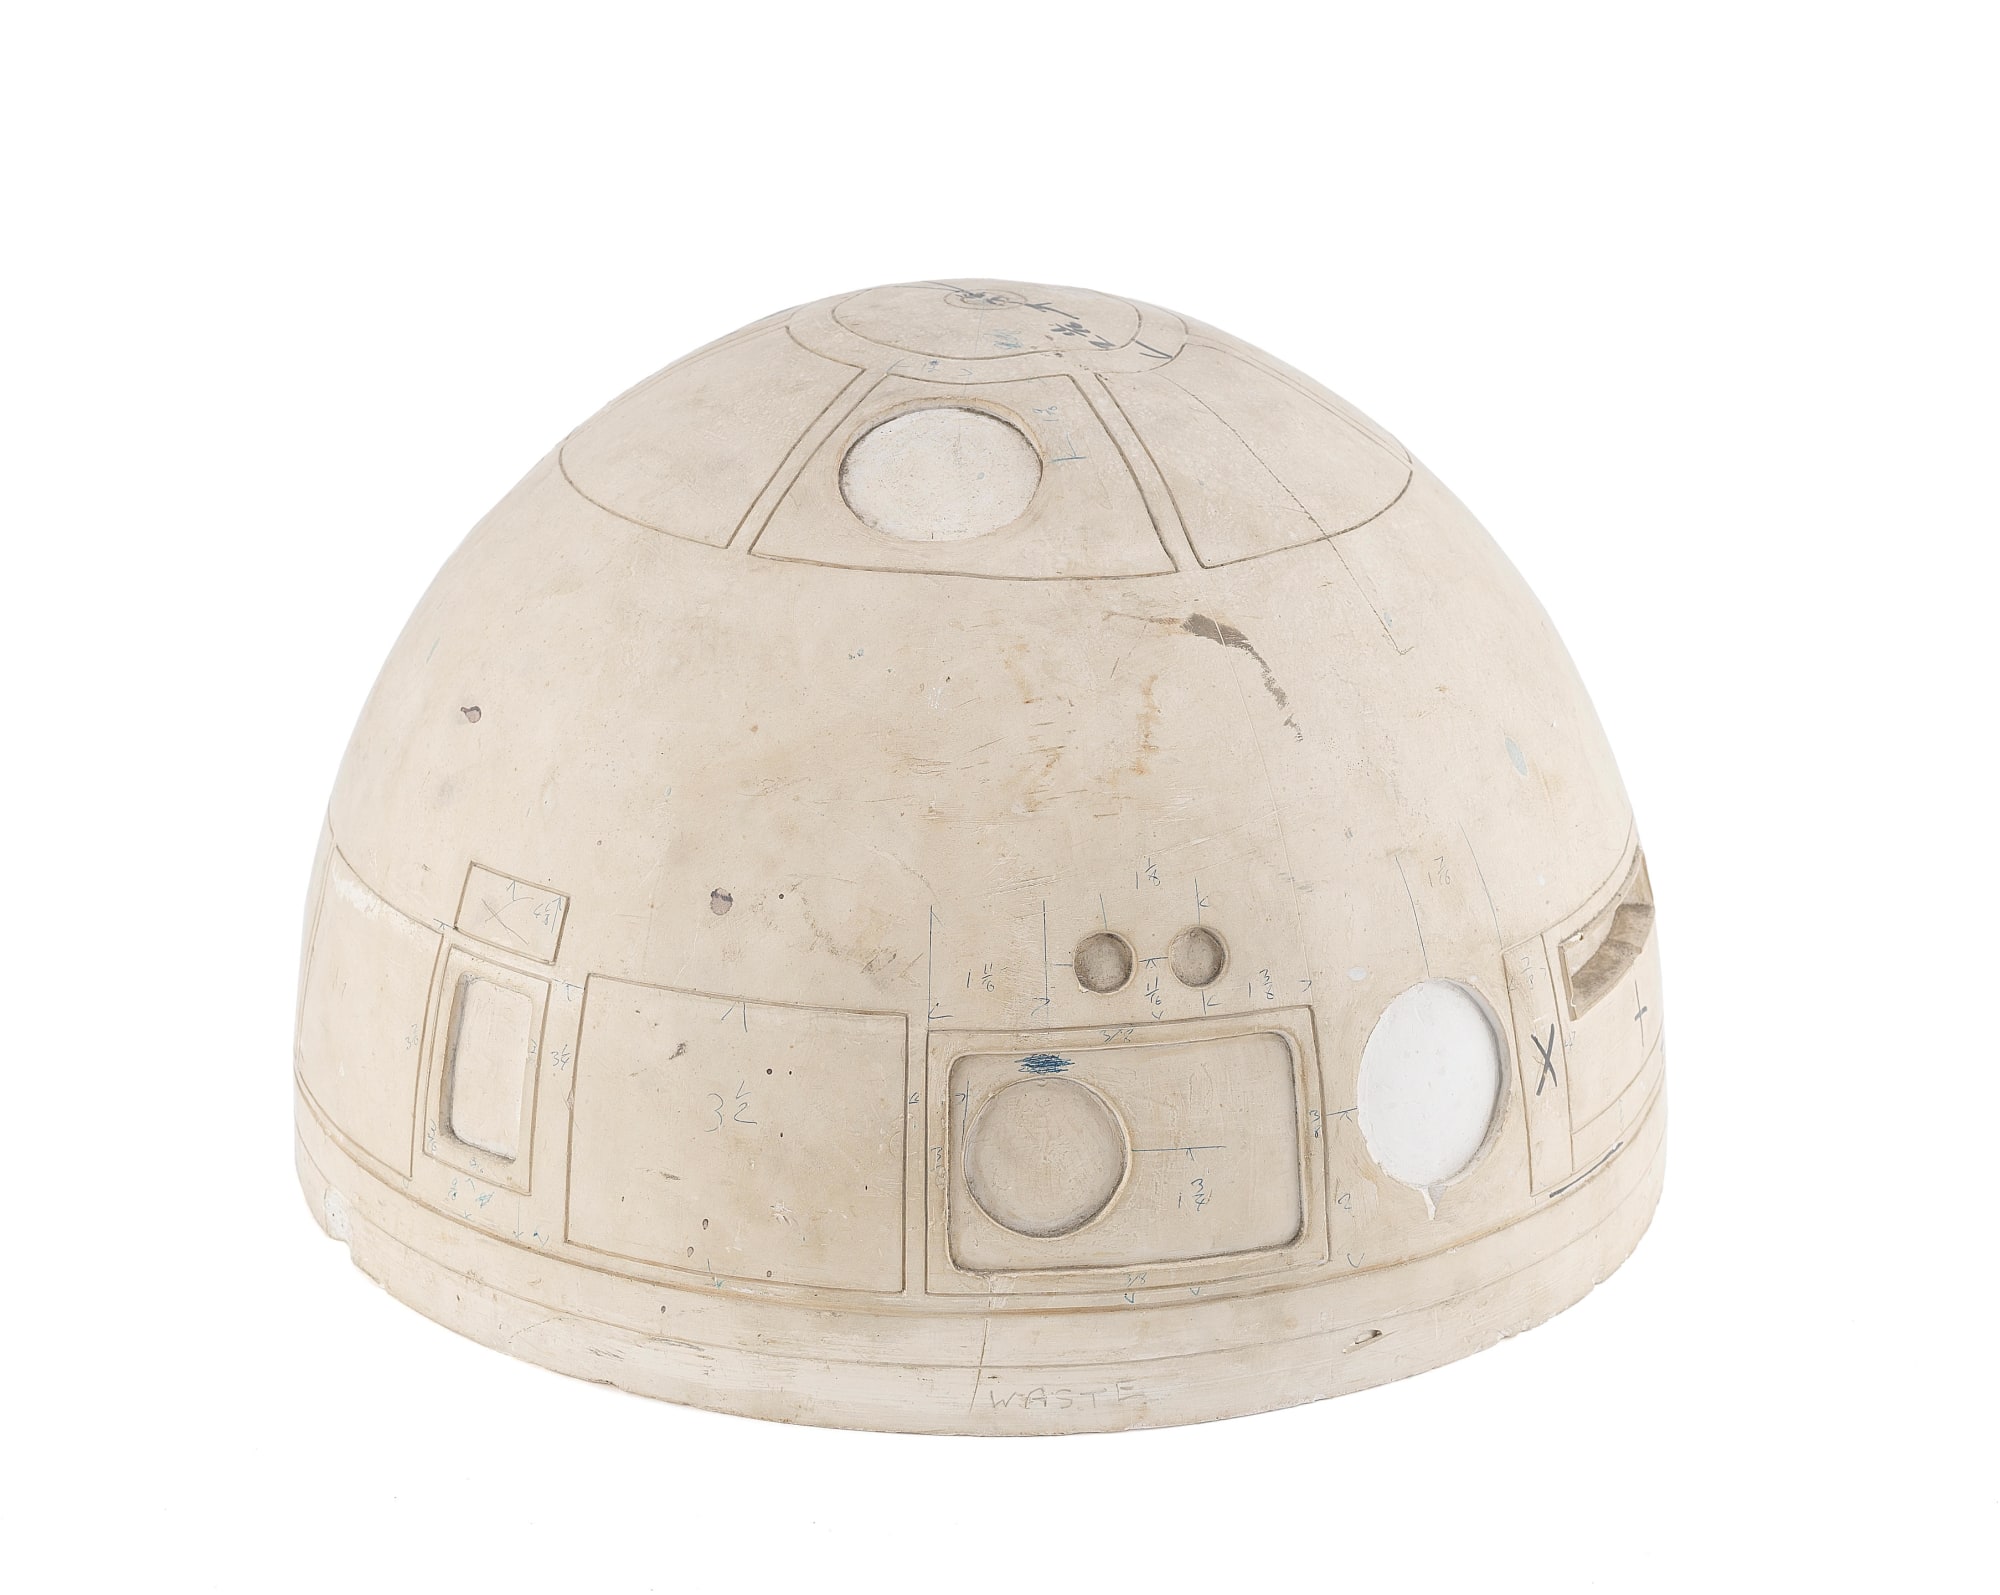 The original plaster mould for R2-D2 which apparently has my granddad's handwriting all over it
